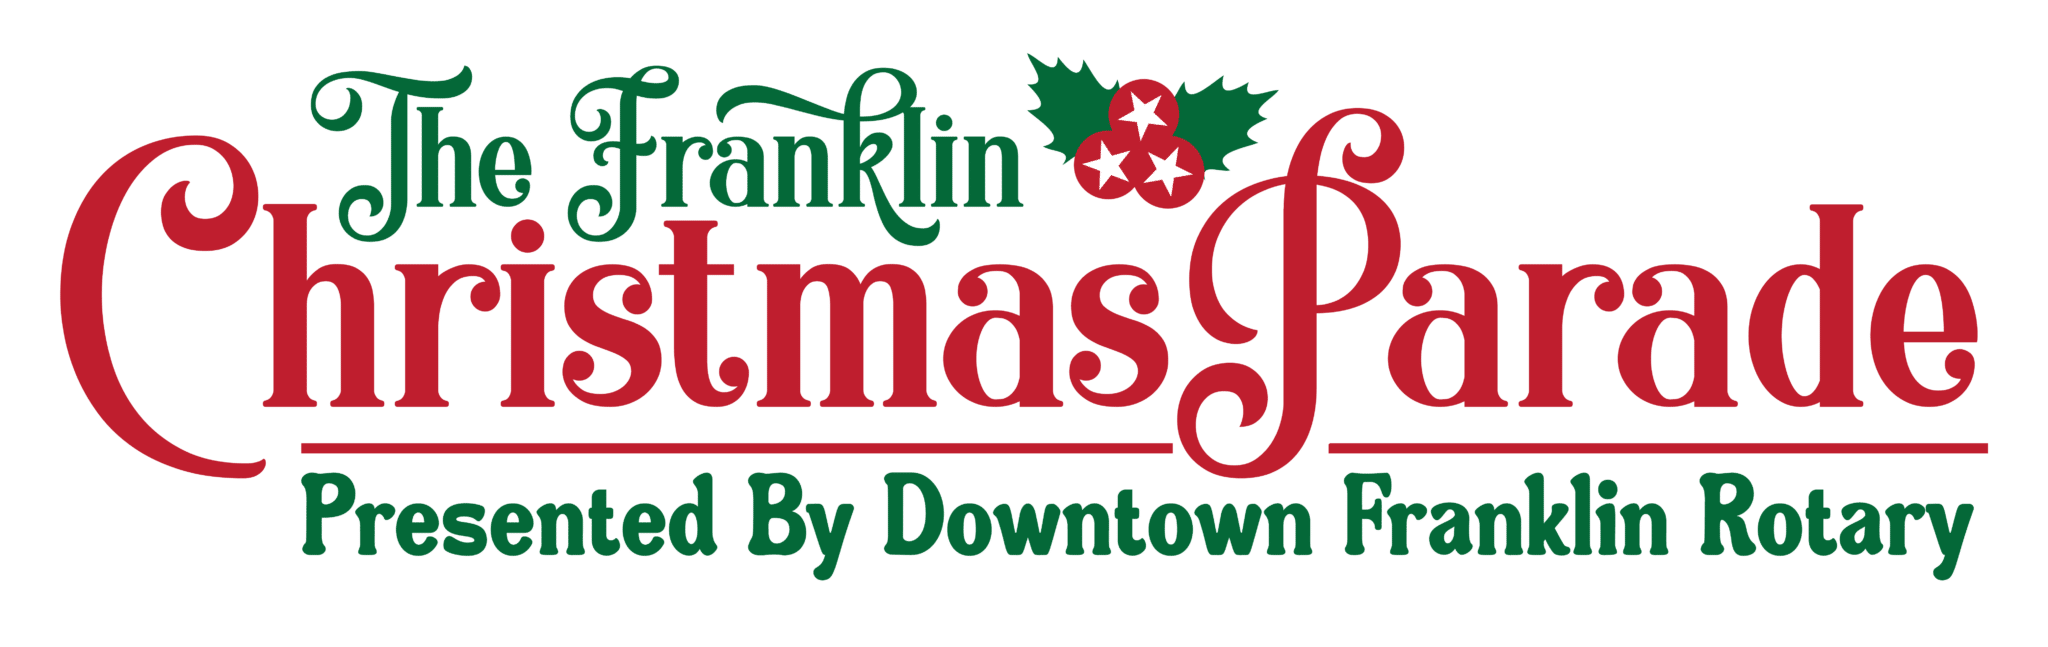 The Franklin Christmas Parade in downtown Franklin, Tennessee, presented by the Downtown Franklin Rotary Club.